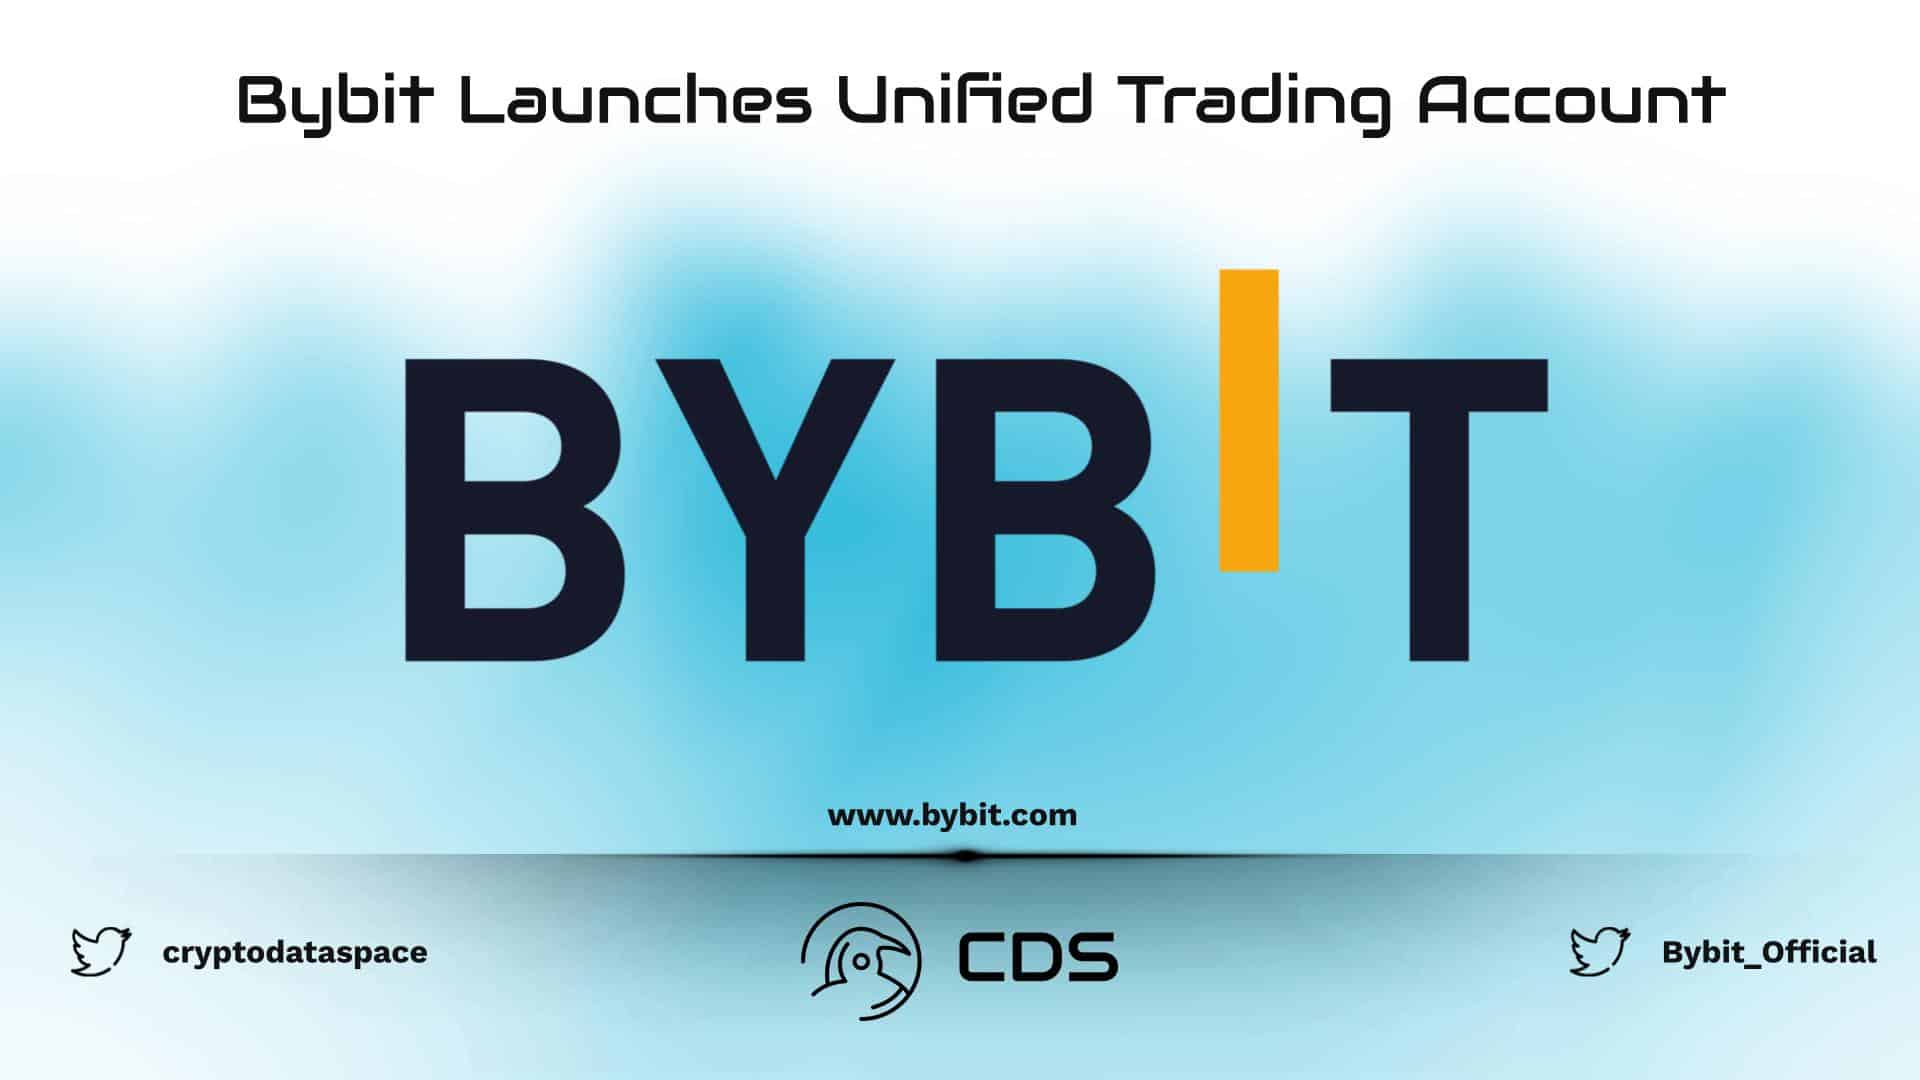 Bybit Launches Unified Trading Account